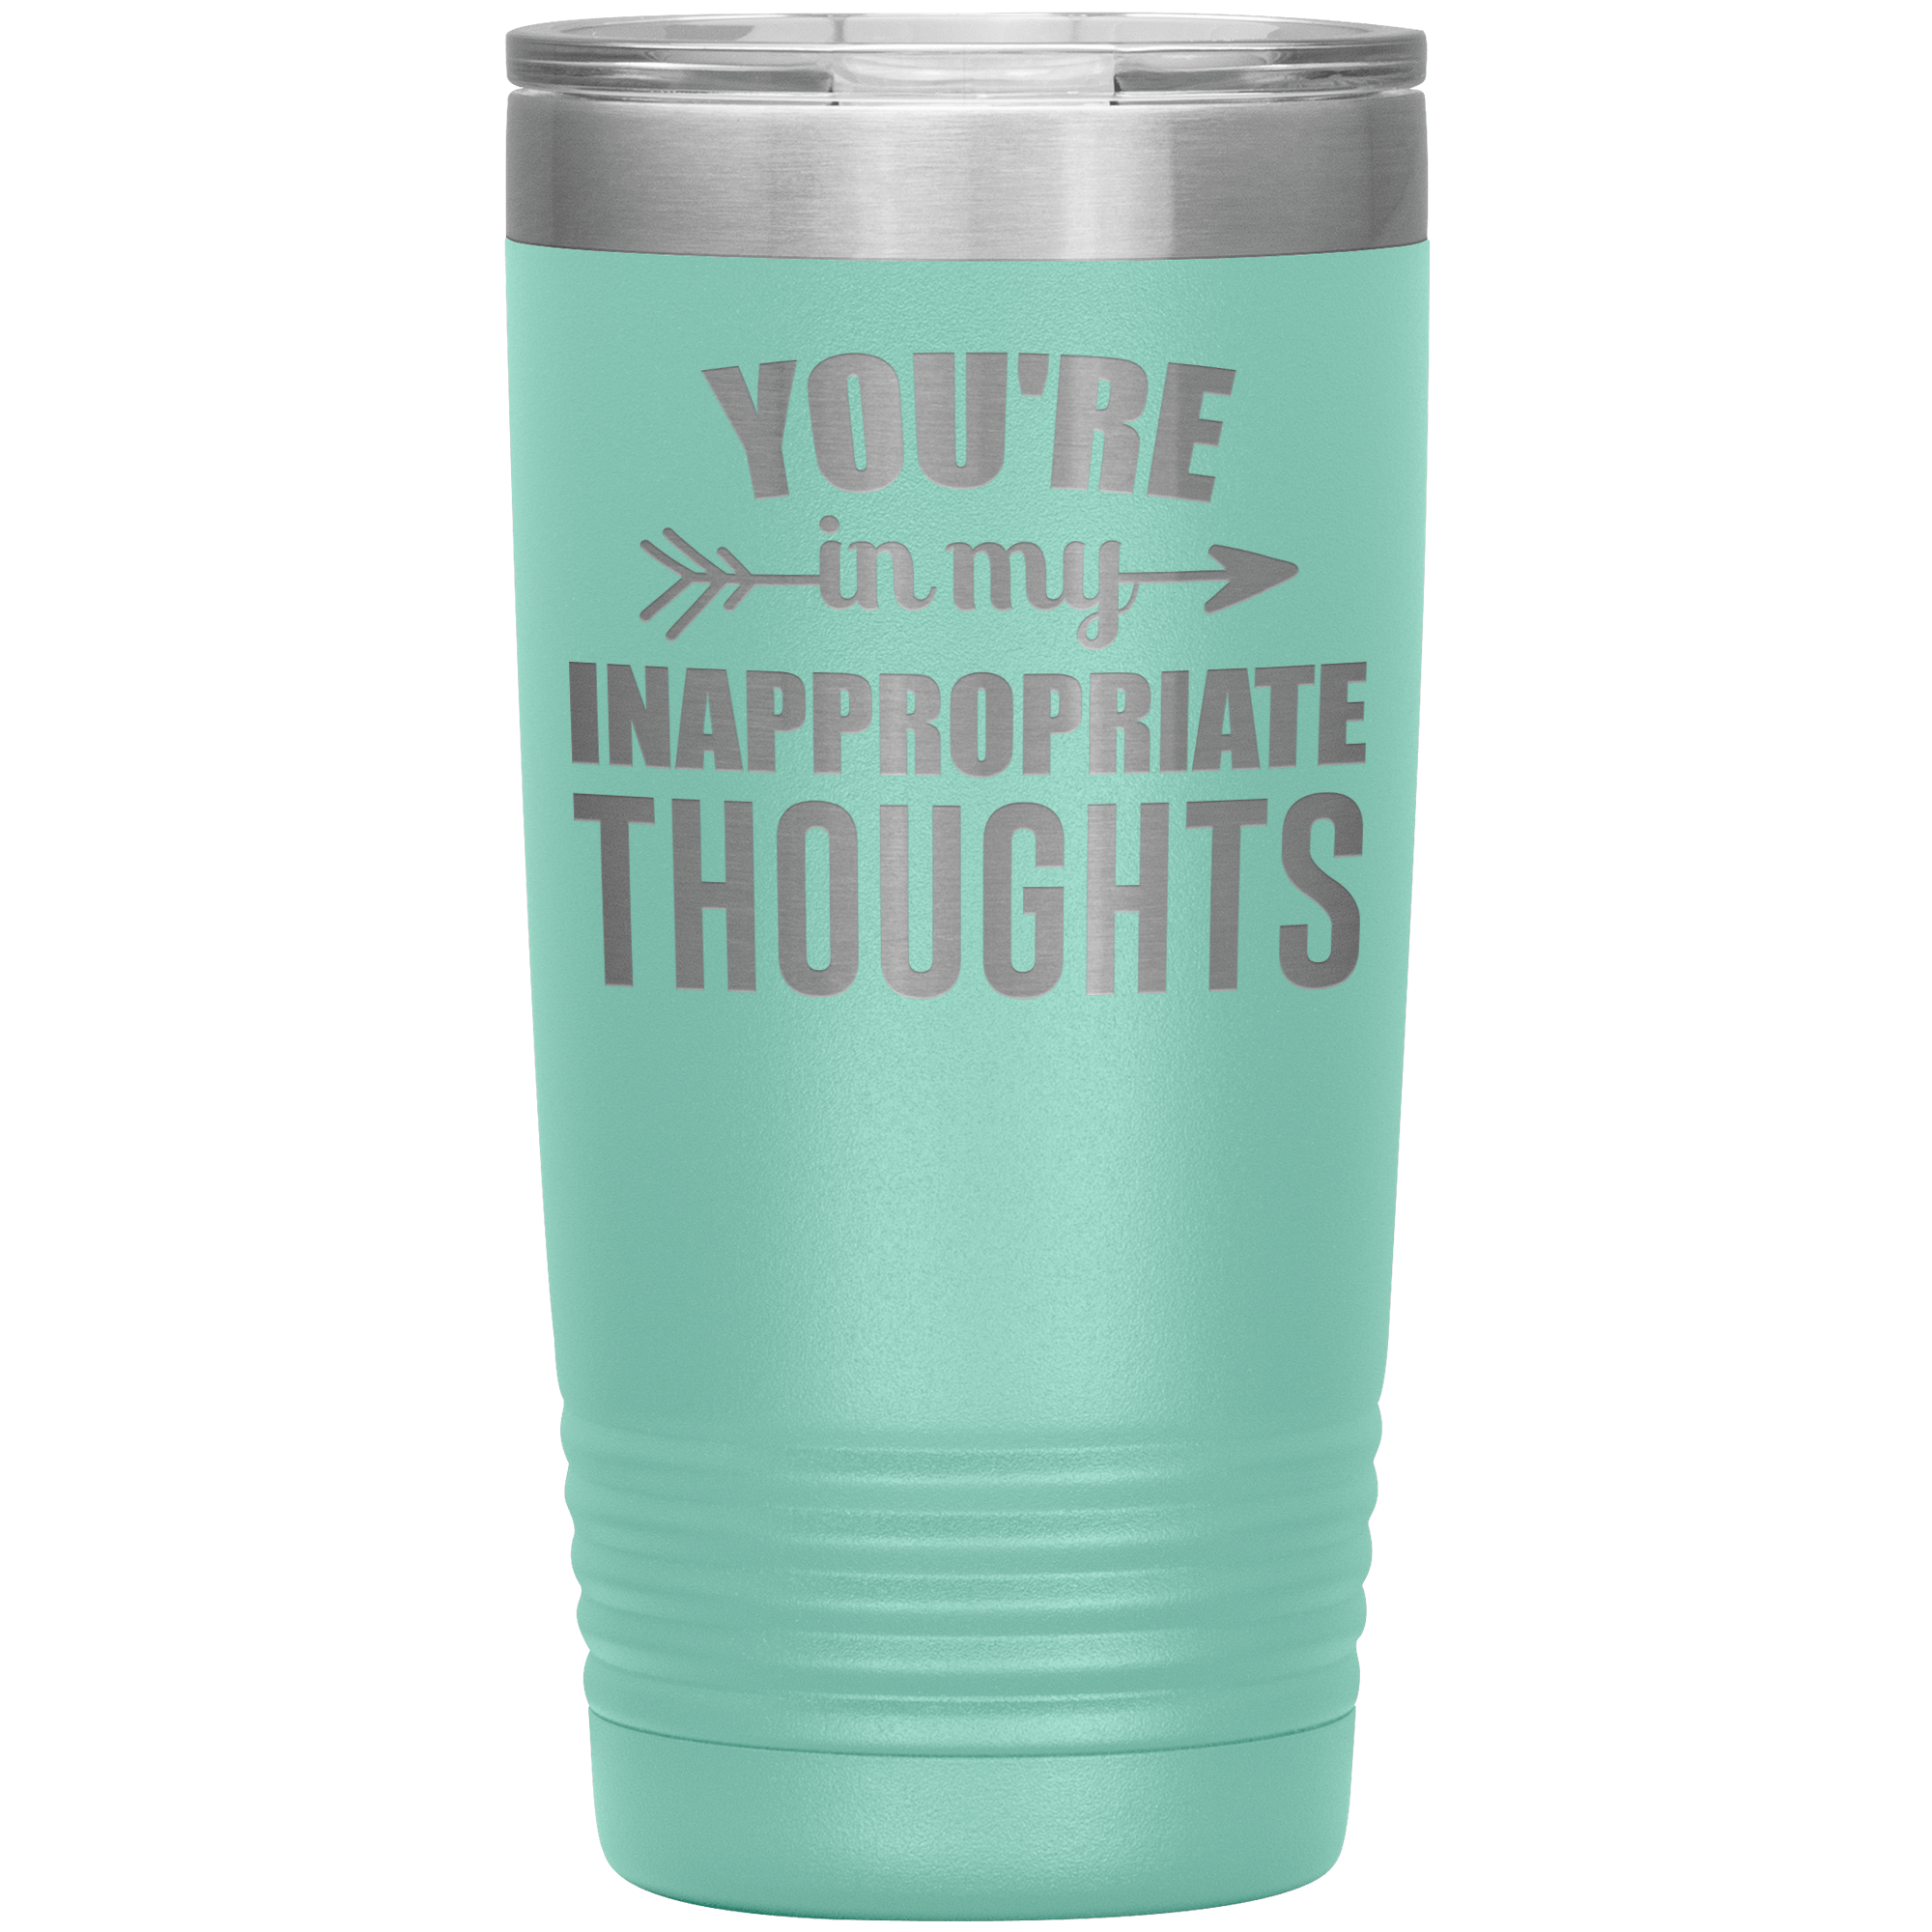 " YOU'RE IN MY INAPPROPRIATE THOUGHTS " TUMBLER